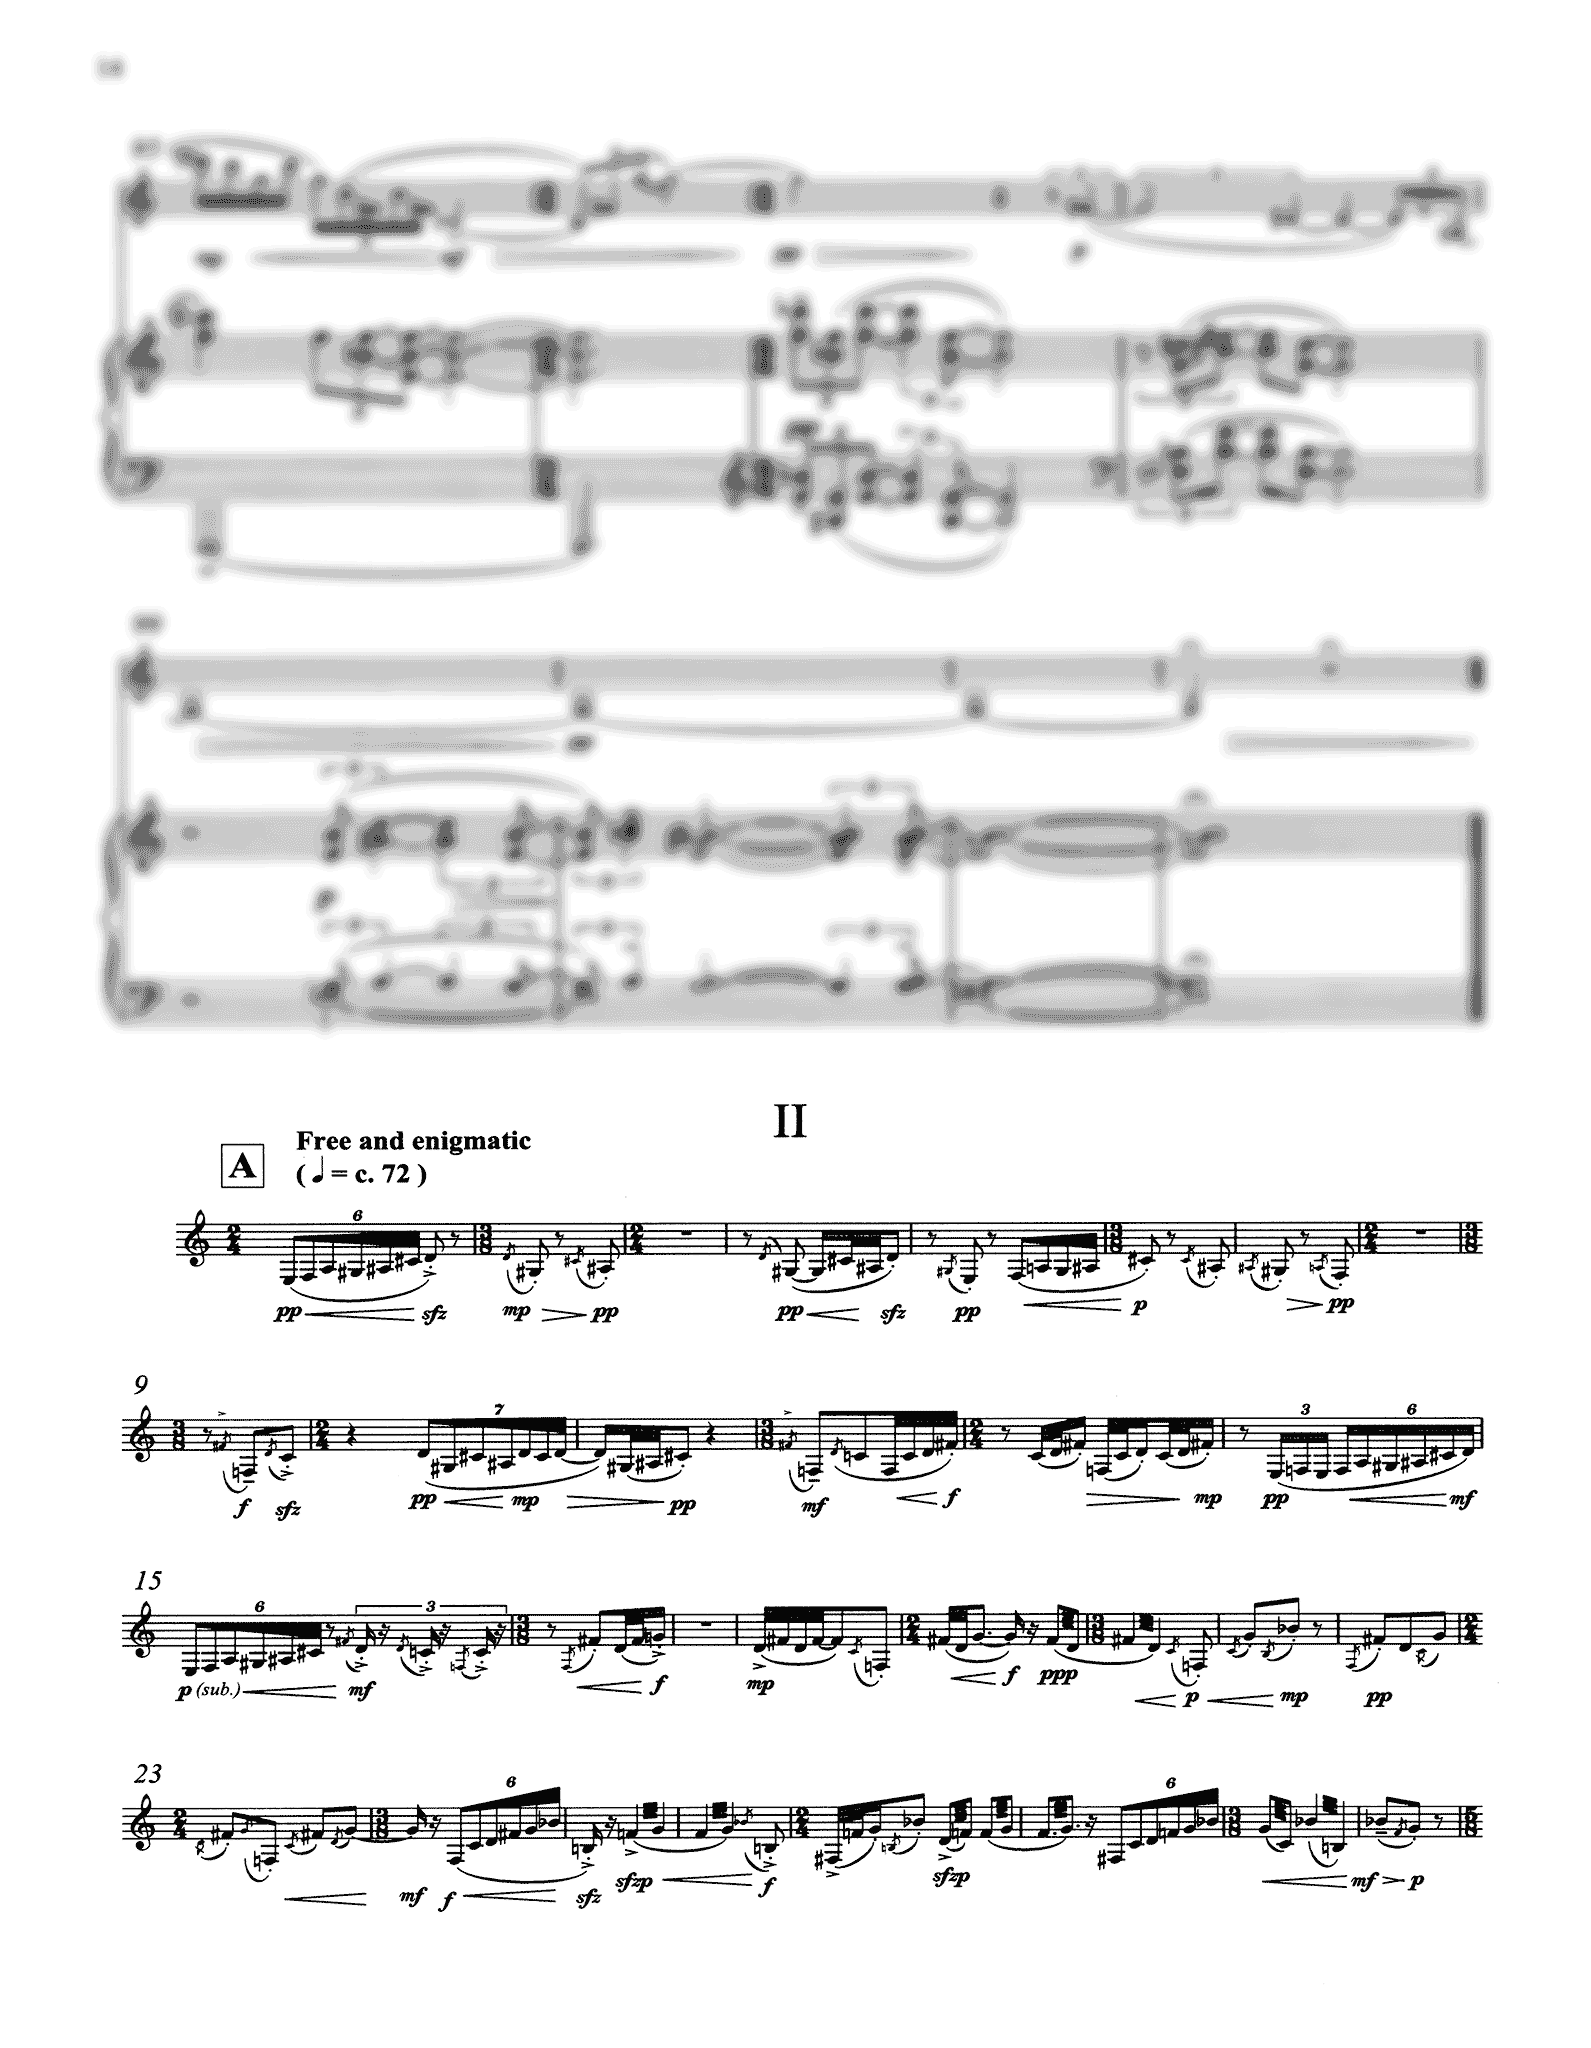 Helen Grime Clarinet Concerto piano reduction - Movement 2